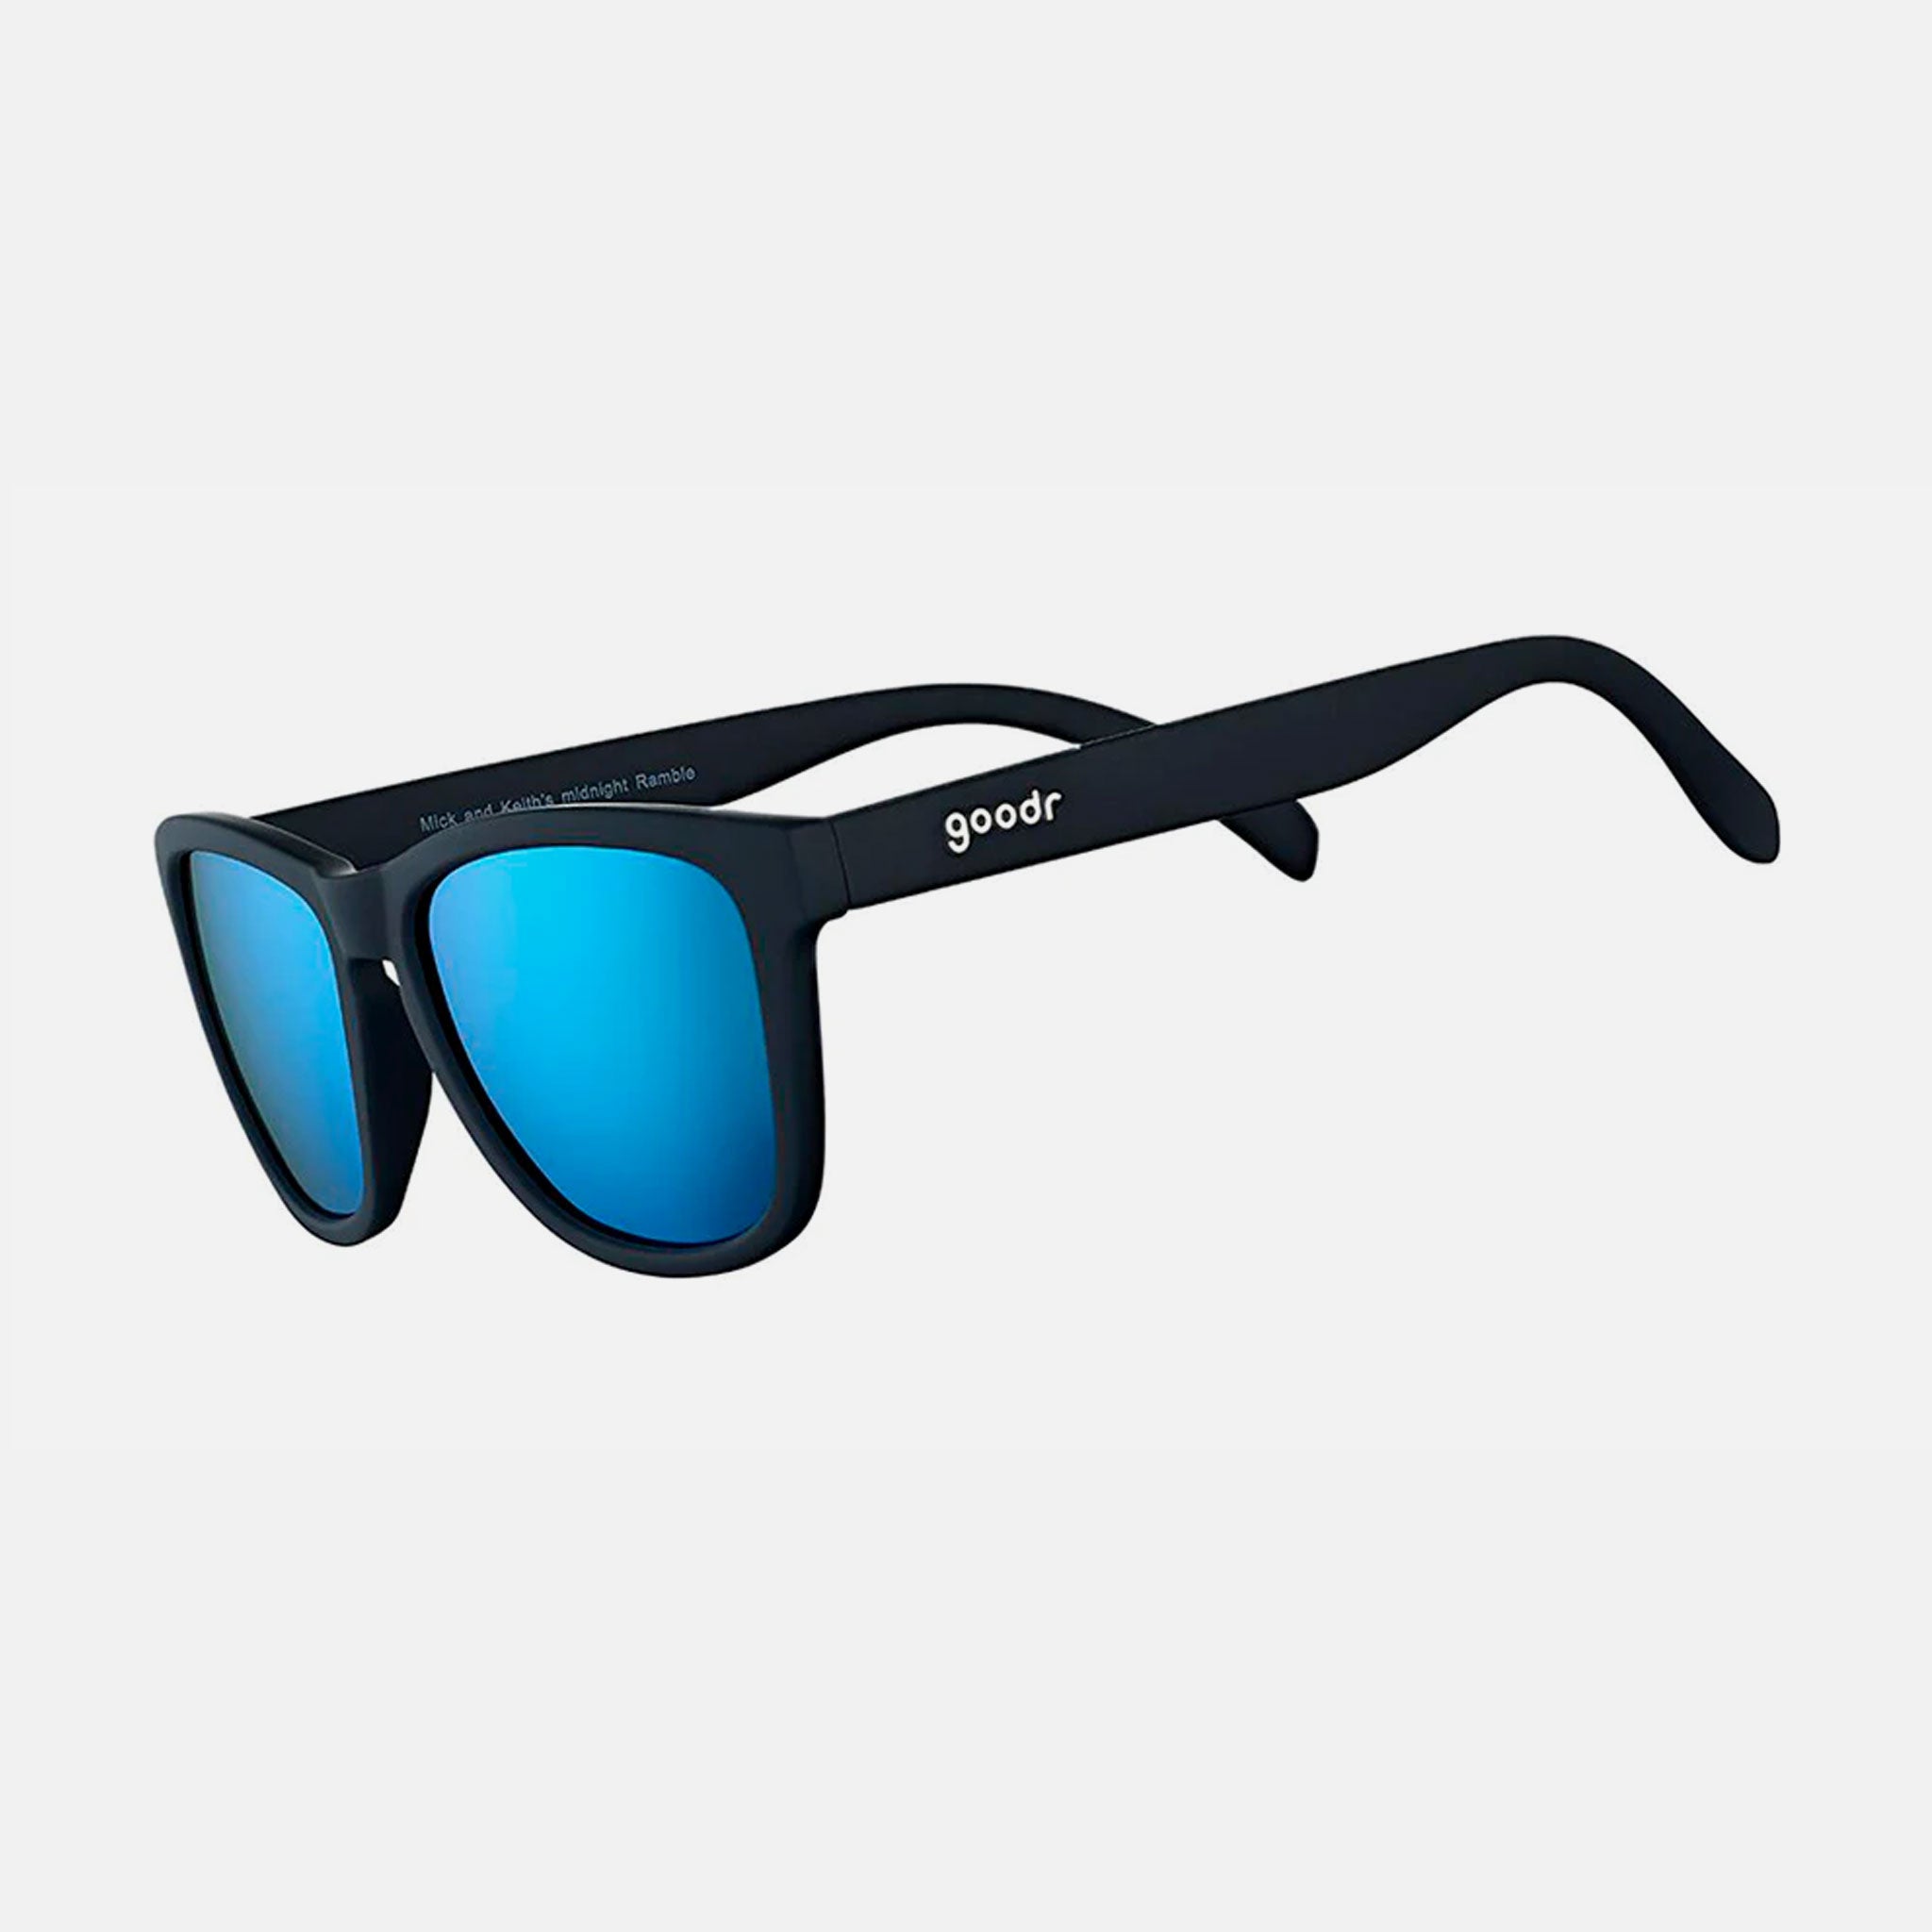 Goodr Sunglasses - Mick and Keith's Midnight Ramble